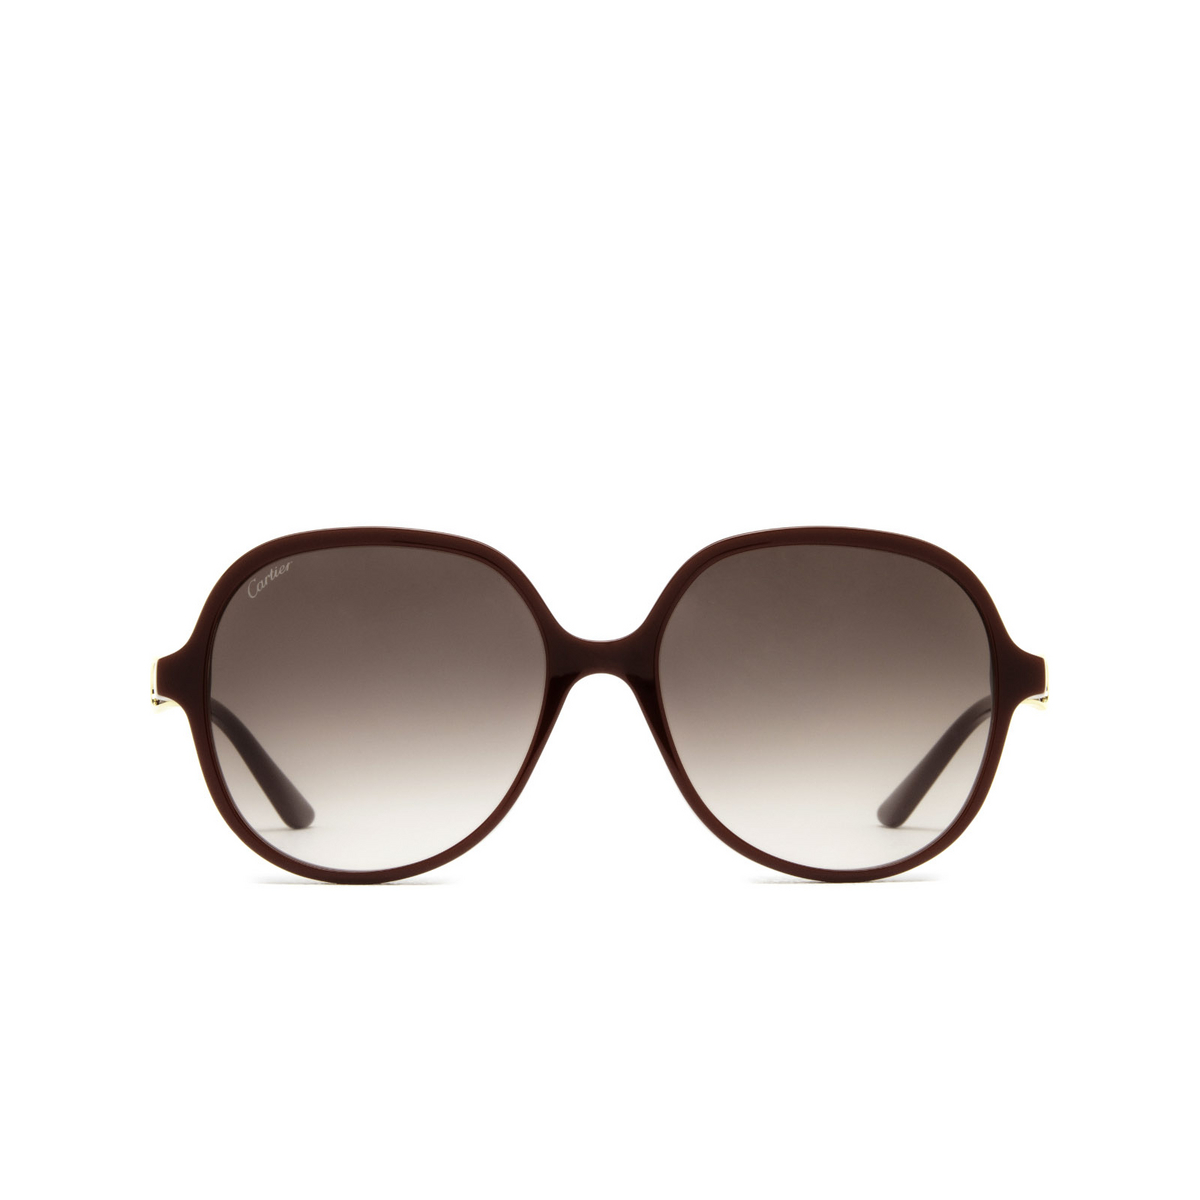 Cartier® Round Sunglasses: CT0350S color Burgundy 003 - front view.